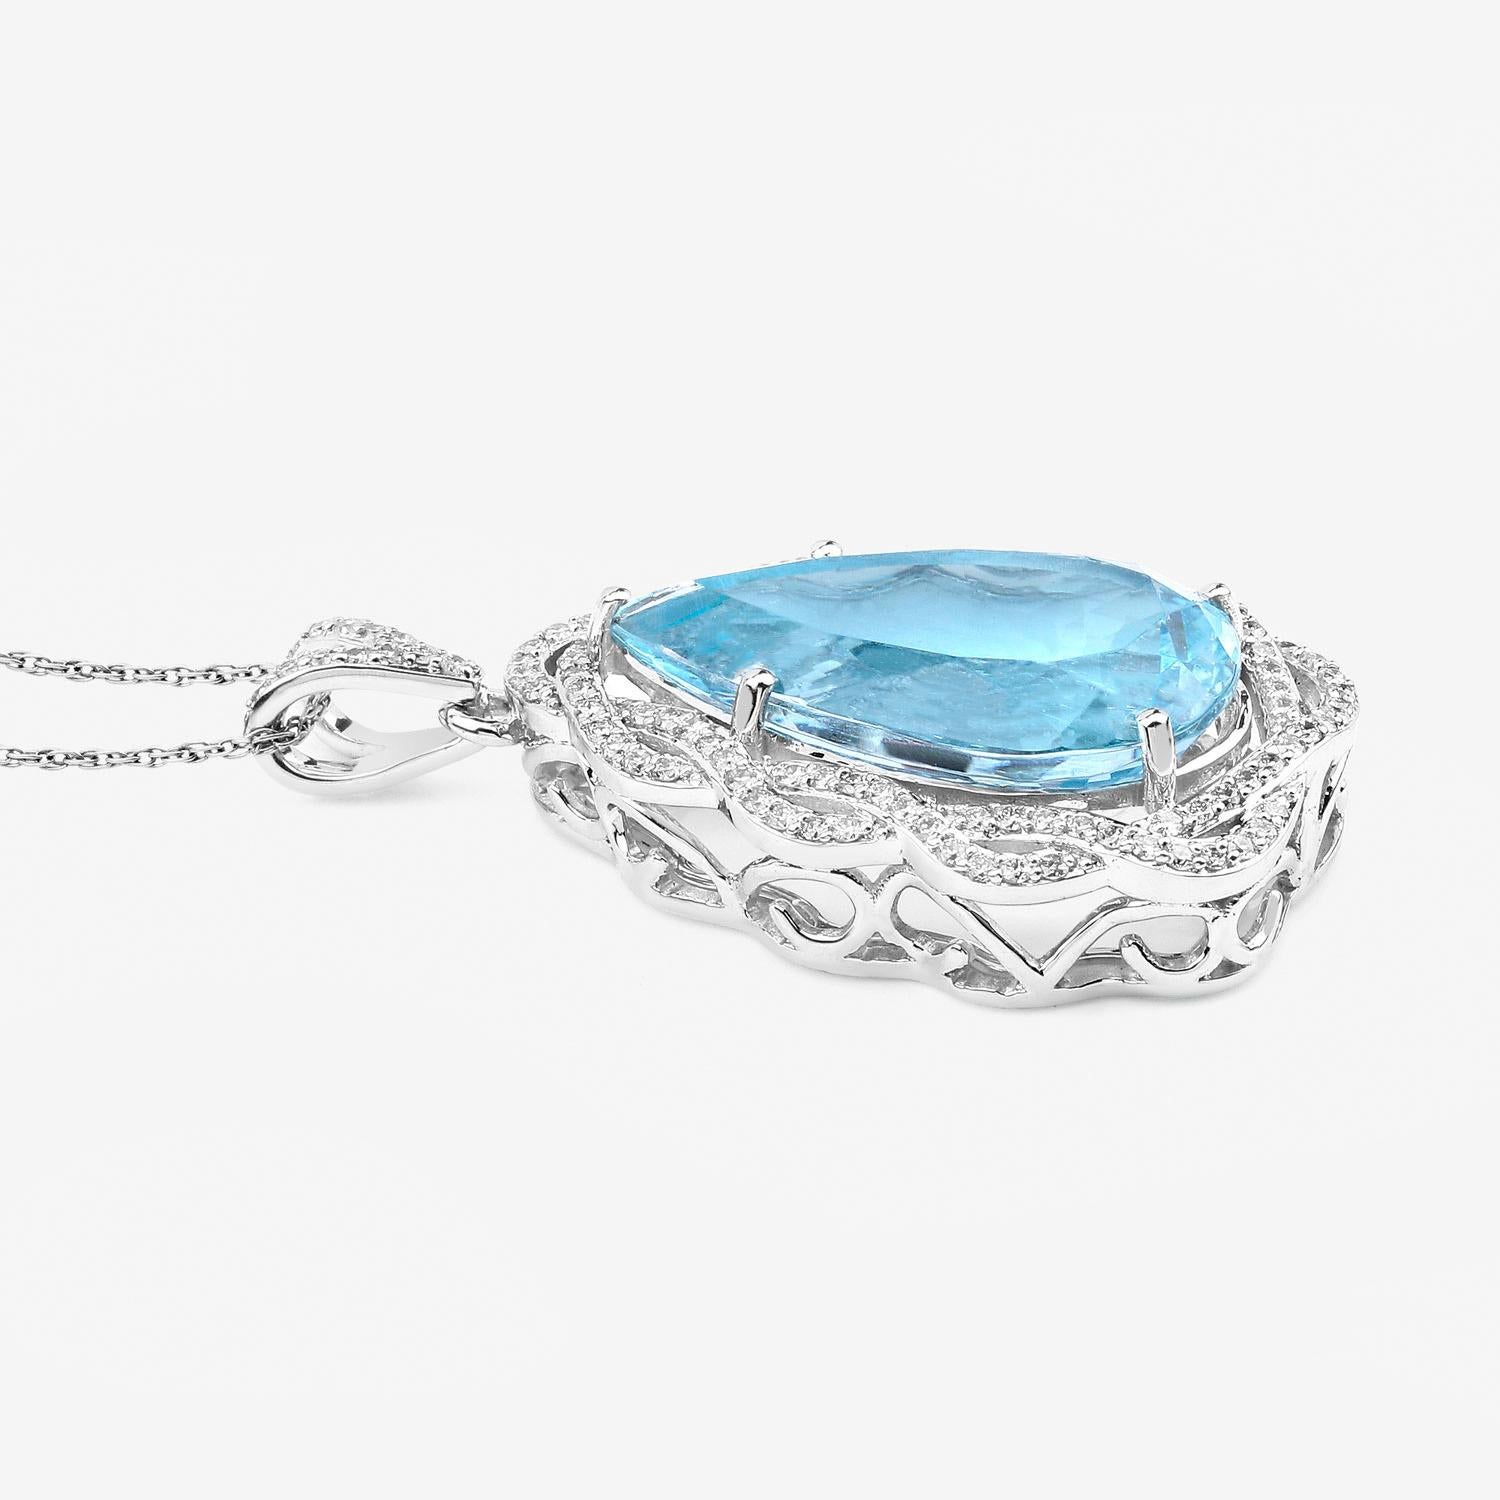 Important Aquamarine Pendant Necklace With Diamonds 11.90 Carats 14K Gold In Excellent Condition For Sale In Laguna Niguel, CA